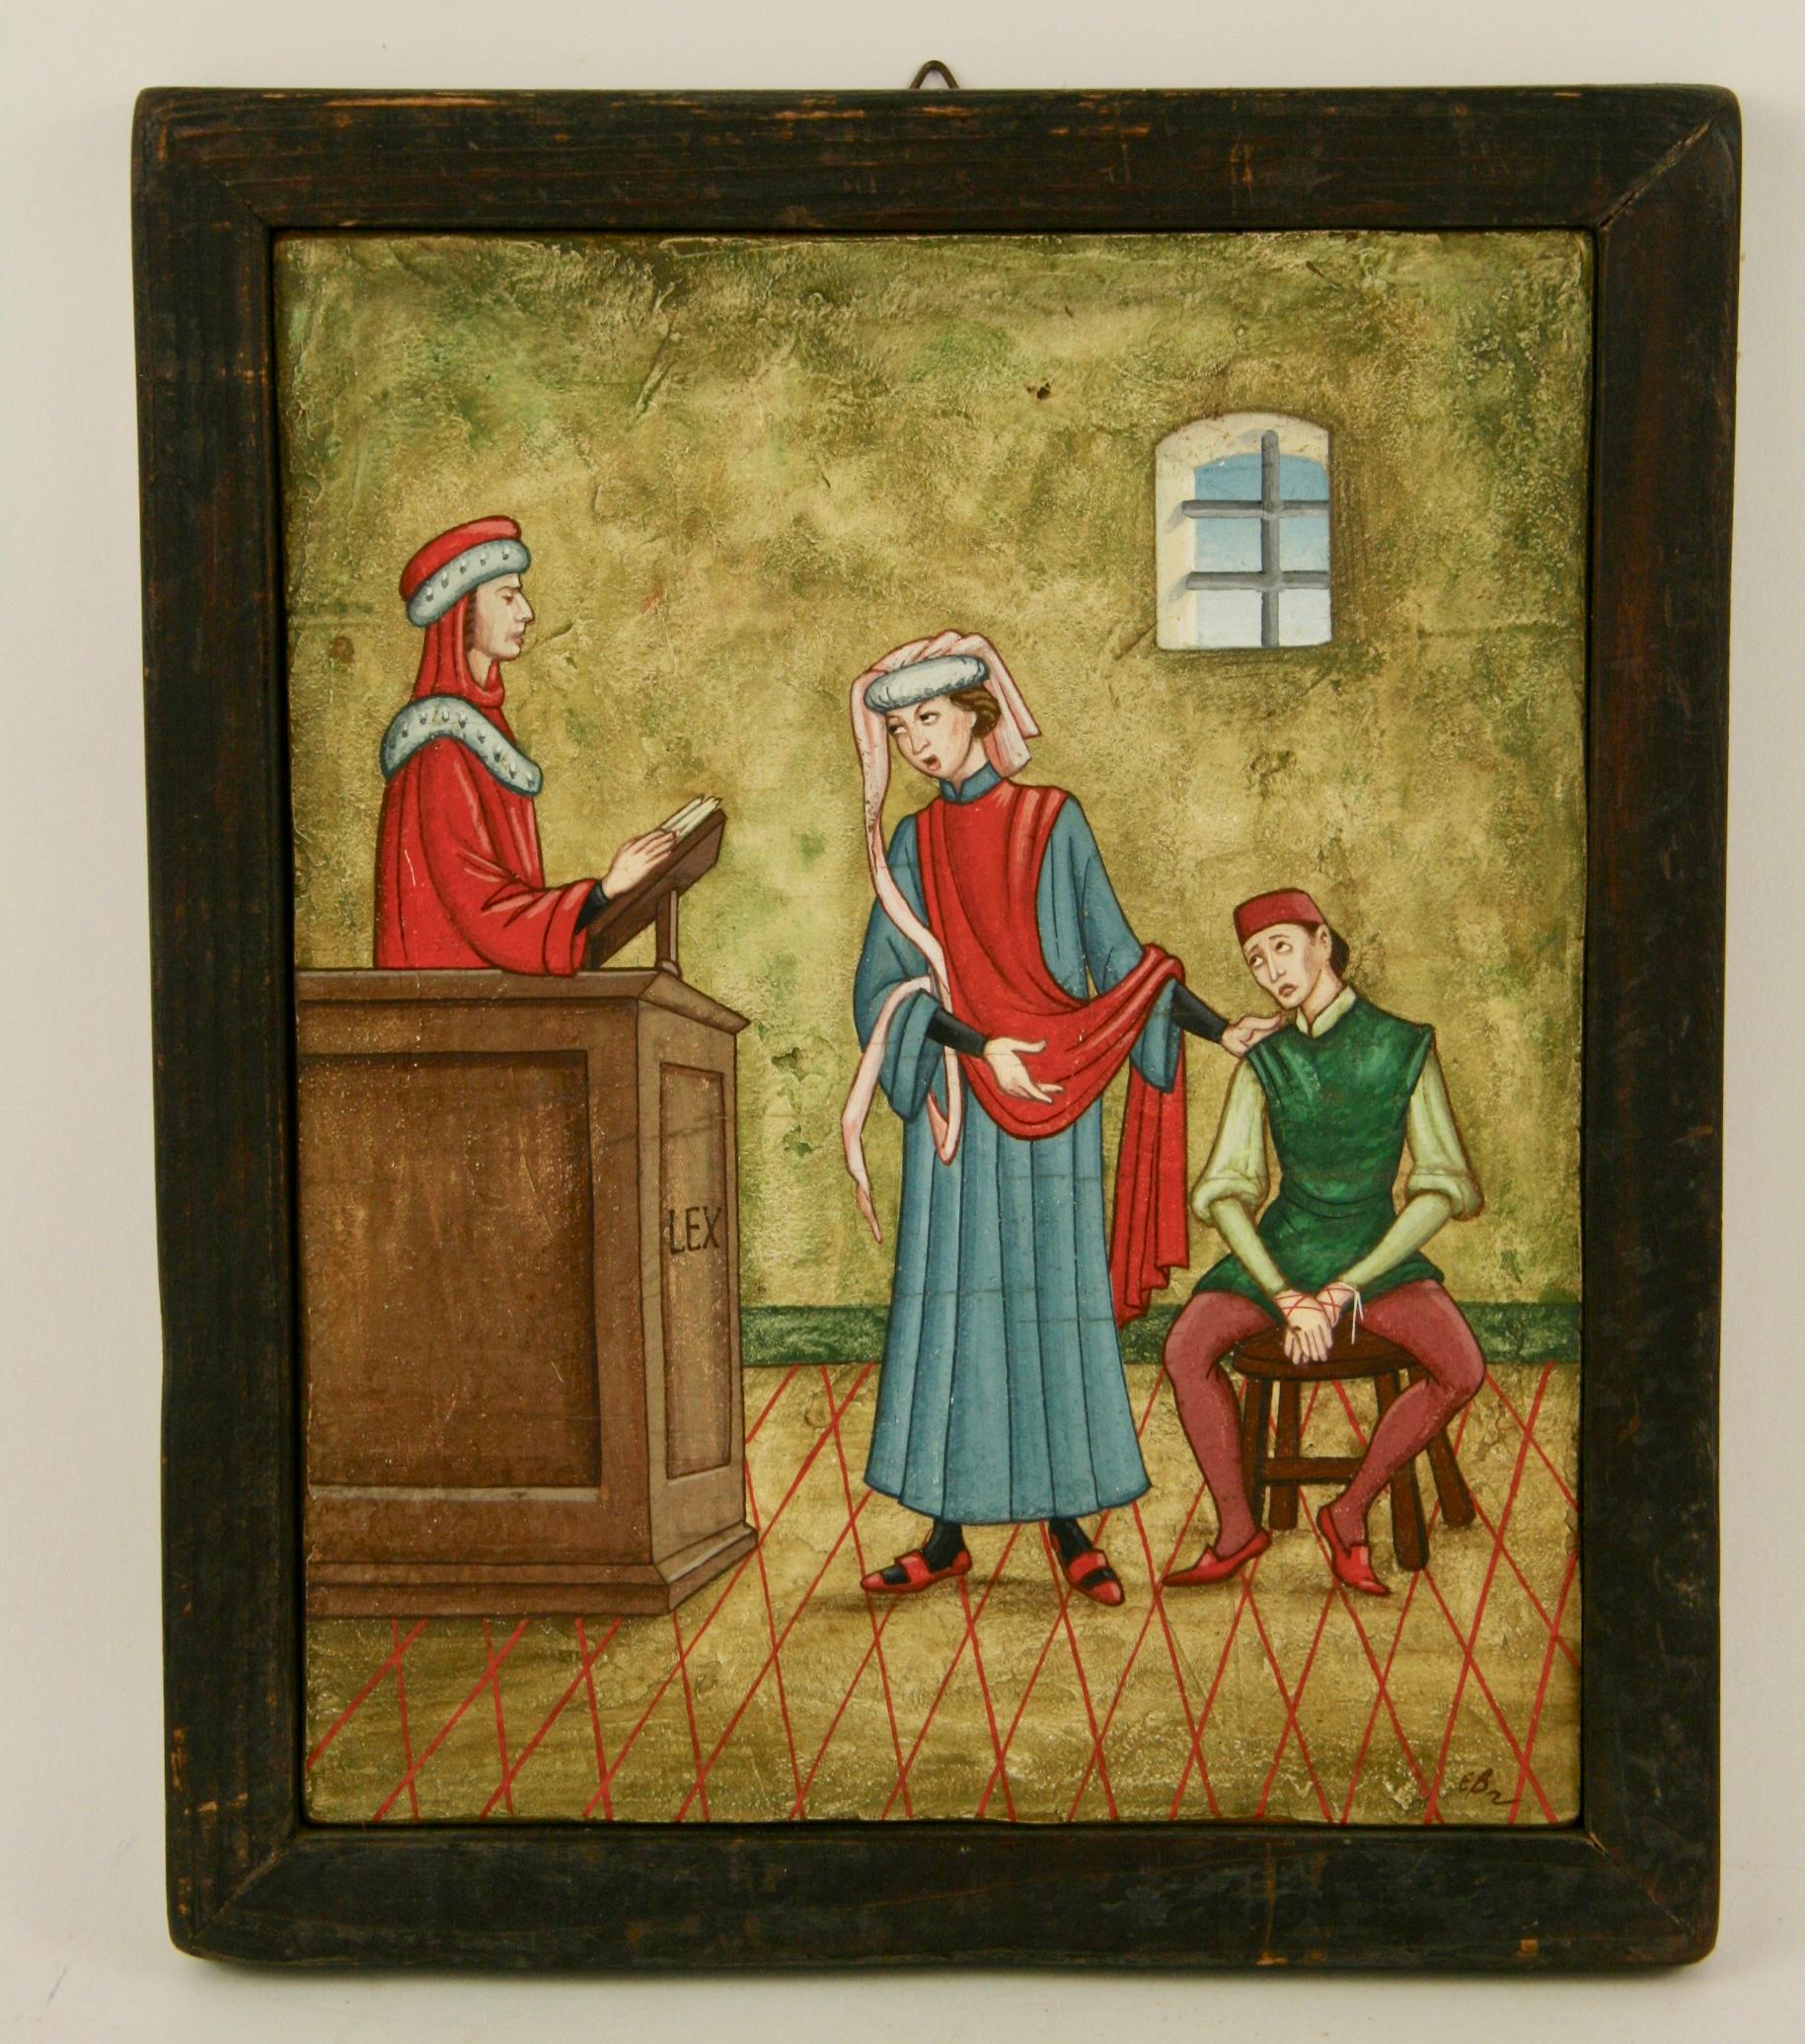 Unknown Figurative Painting -  Antique English Oil Painting on Wood Panel "The Middle Age Trial" 